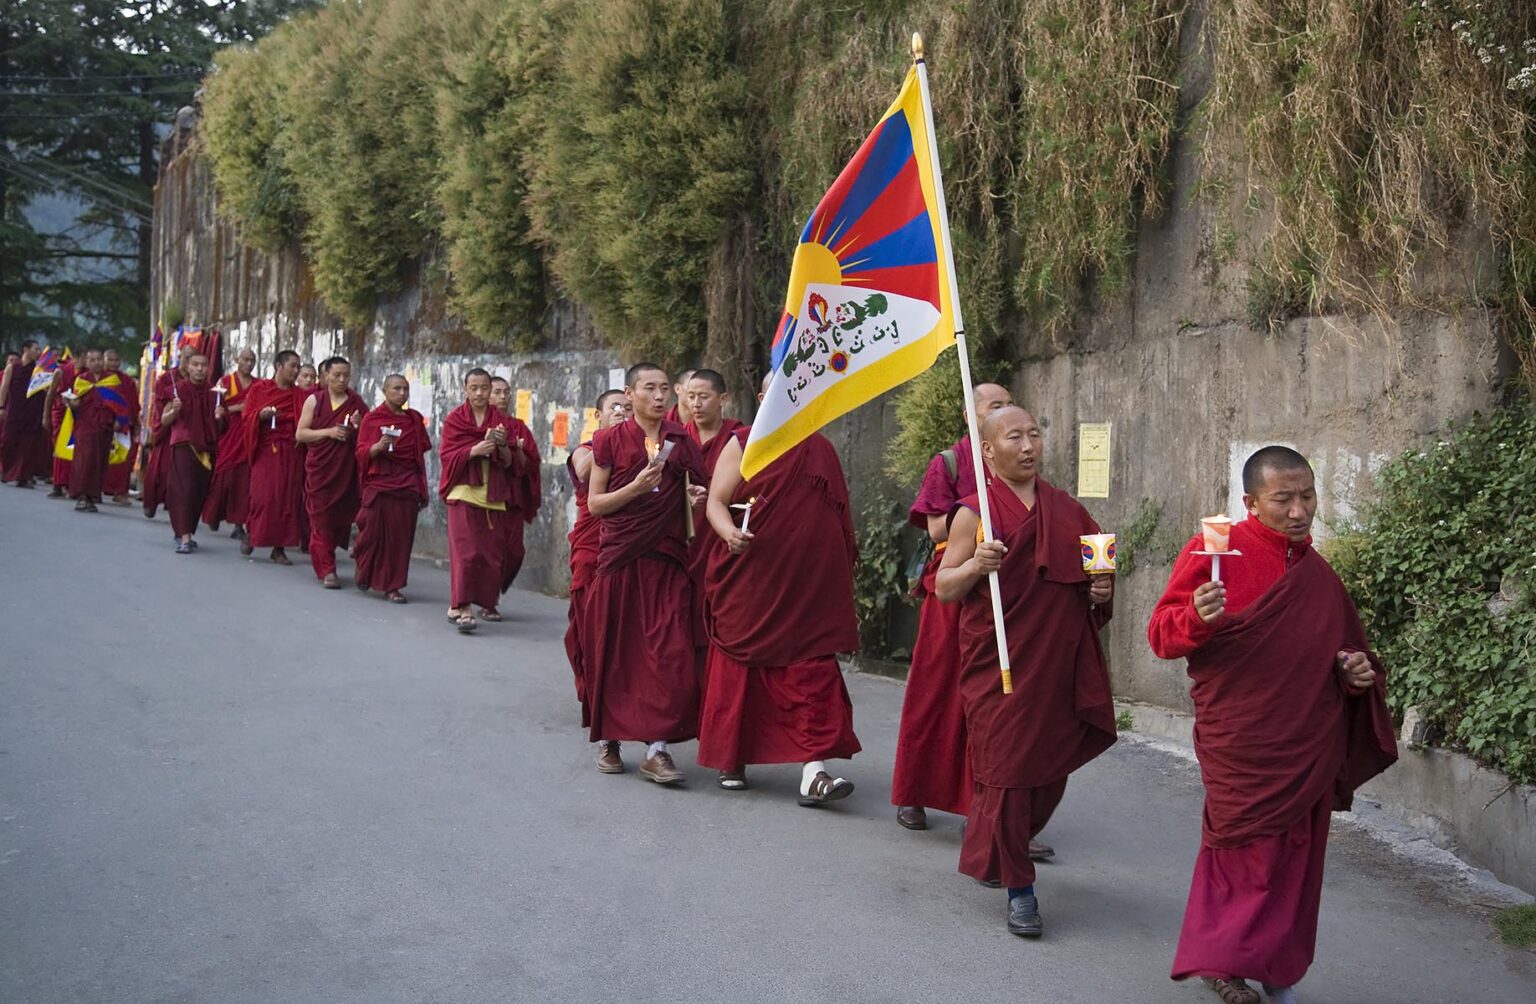 TIBETAN NUNS march in protest of the Chinese human rights abuses in Tibet on the streets of MCLEOD GANJ - DHARAMSALA, INDIA